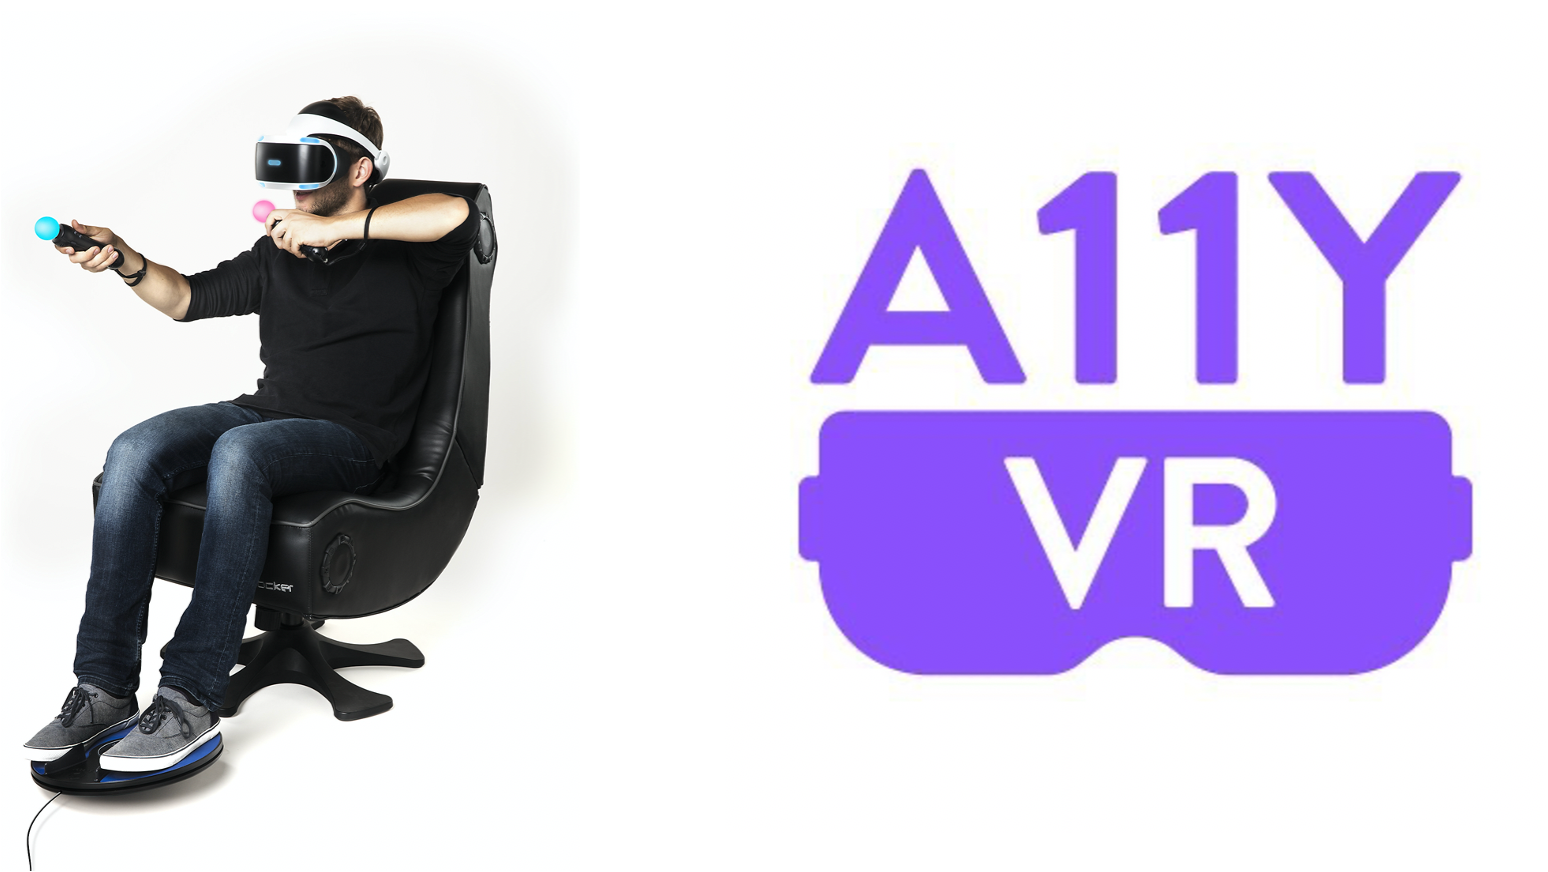 3dRudder Controller showing gamer using PS4 VR Headset controlling the experience with their feet and hands next to A11yVR logo